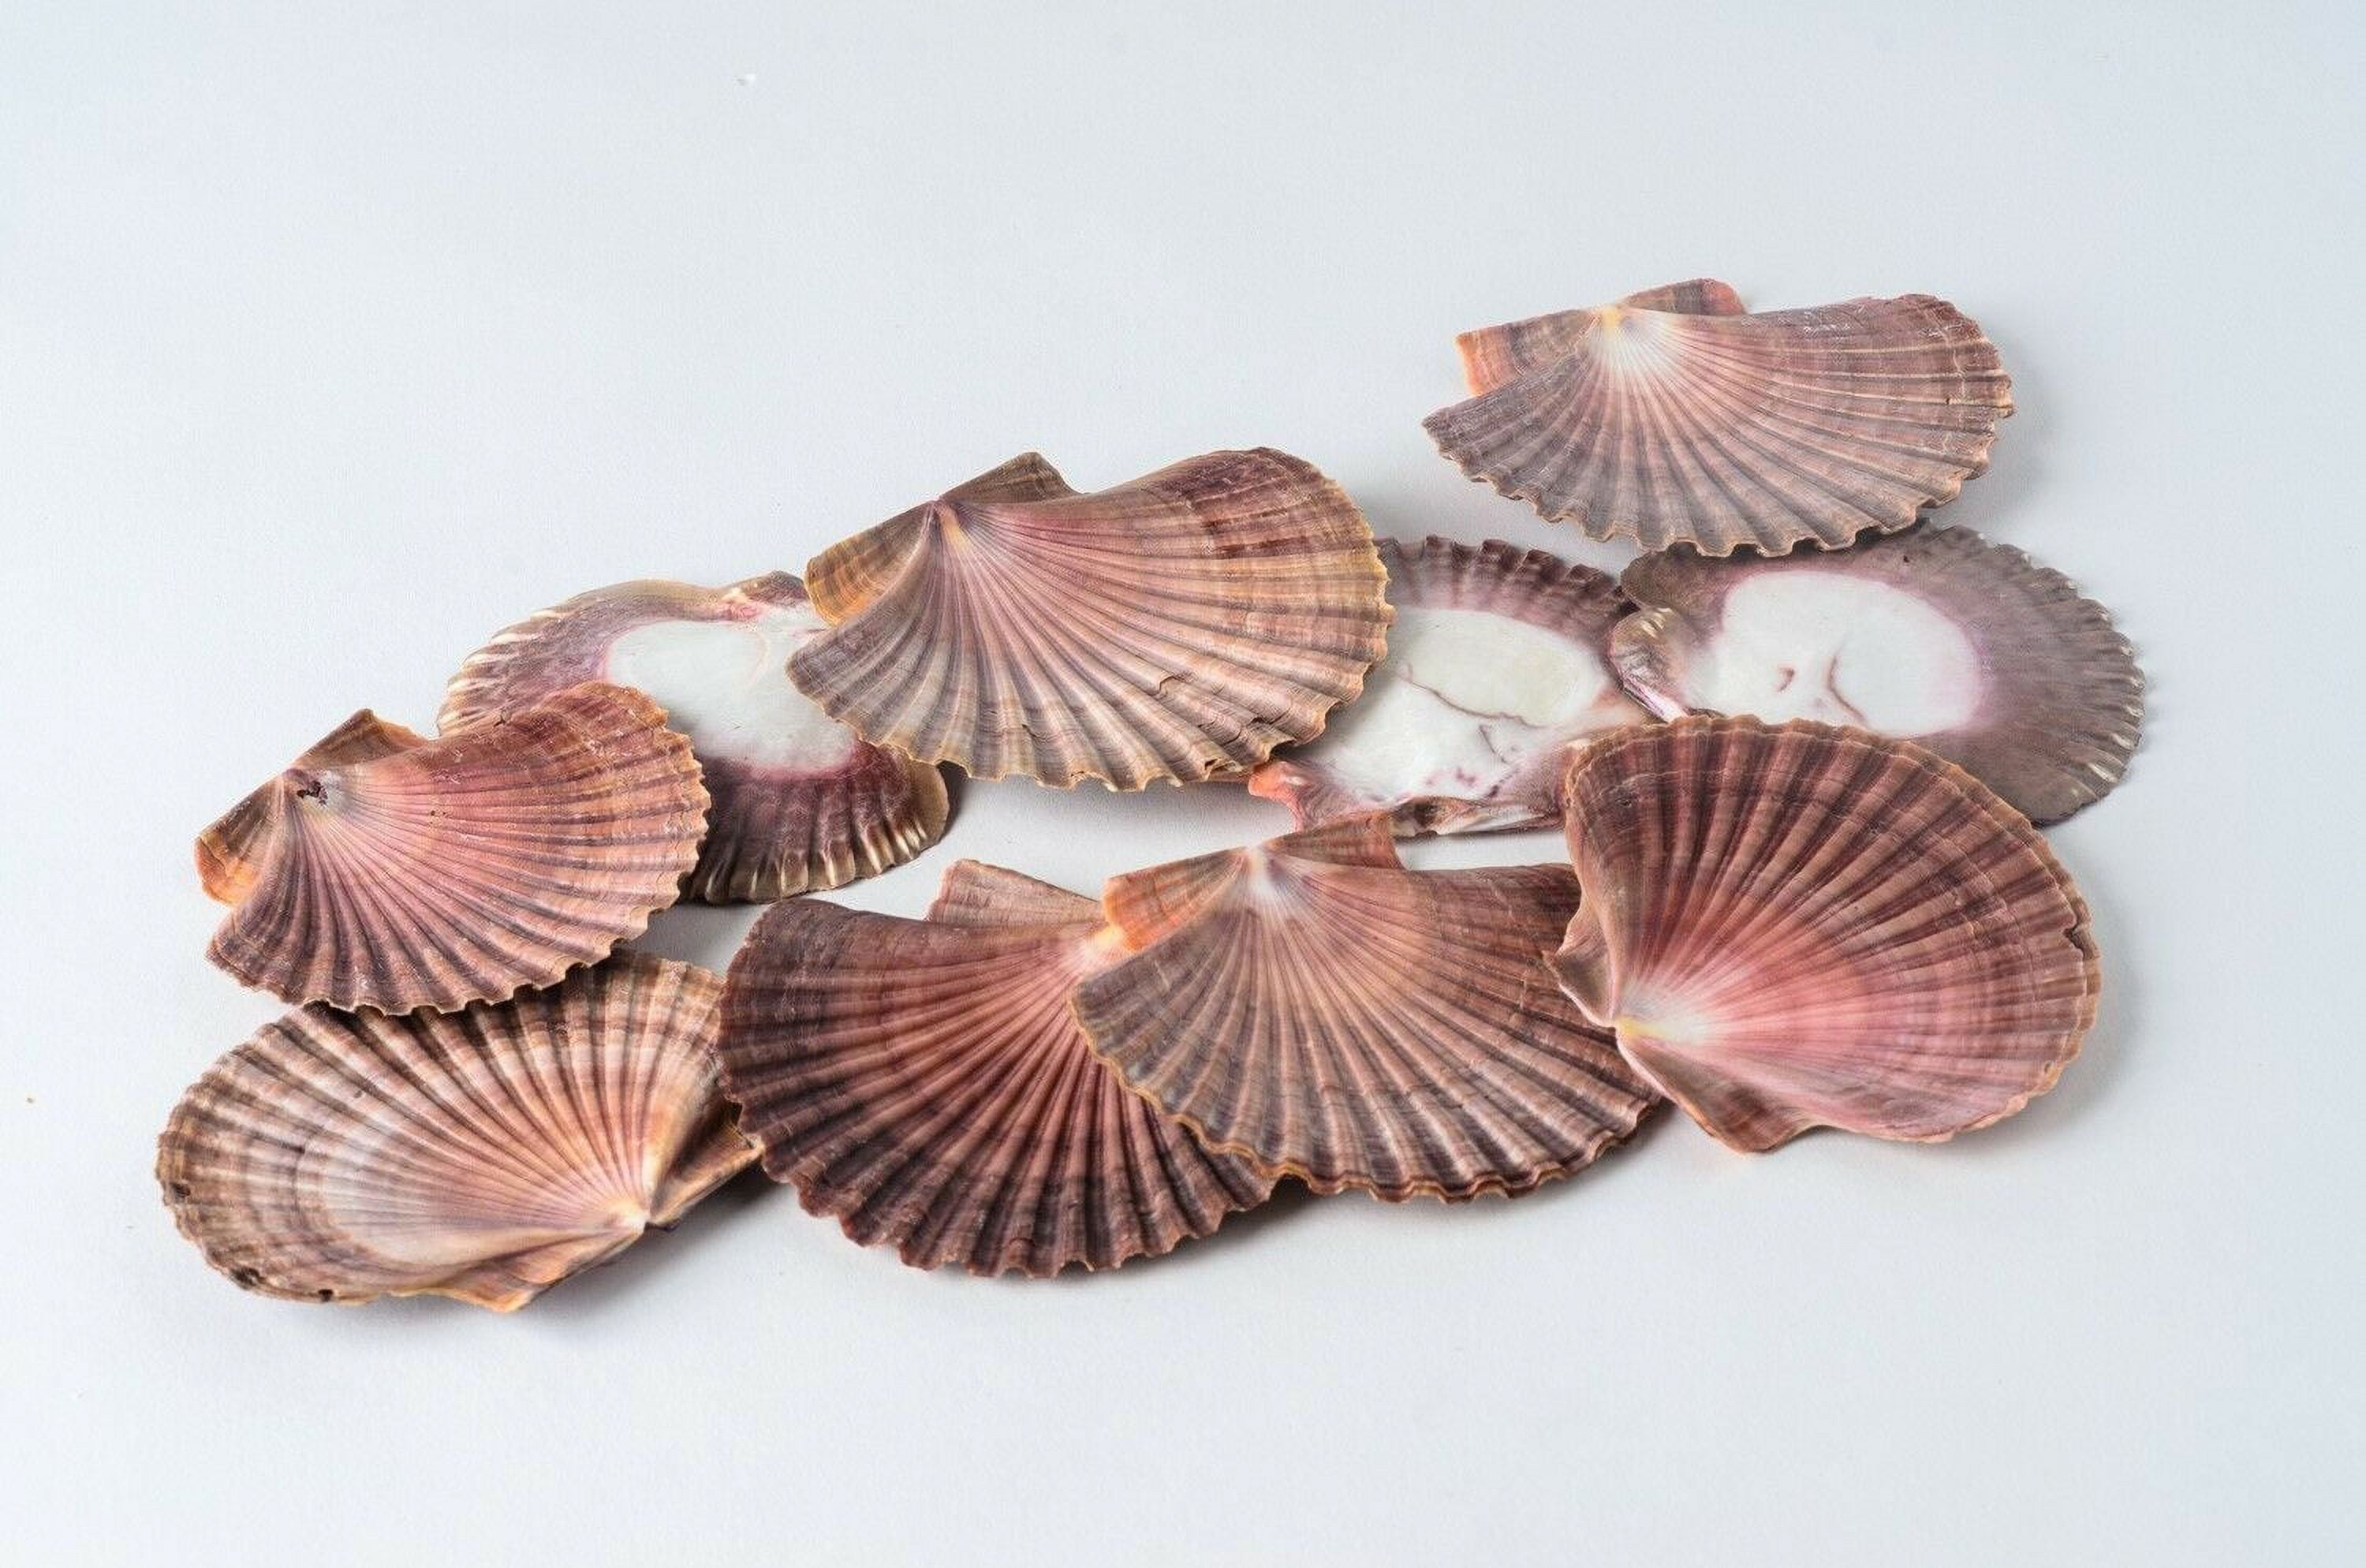 LUCKY BABY Small Sea Shells for Decorating, 330g 140~160pcs Bulk Tiny  Seashells for Crafting 1/2 - 1 1/4, Natural Scallop Shells for Crafts,  Home